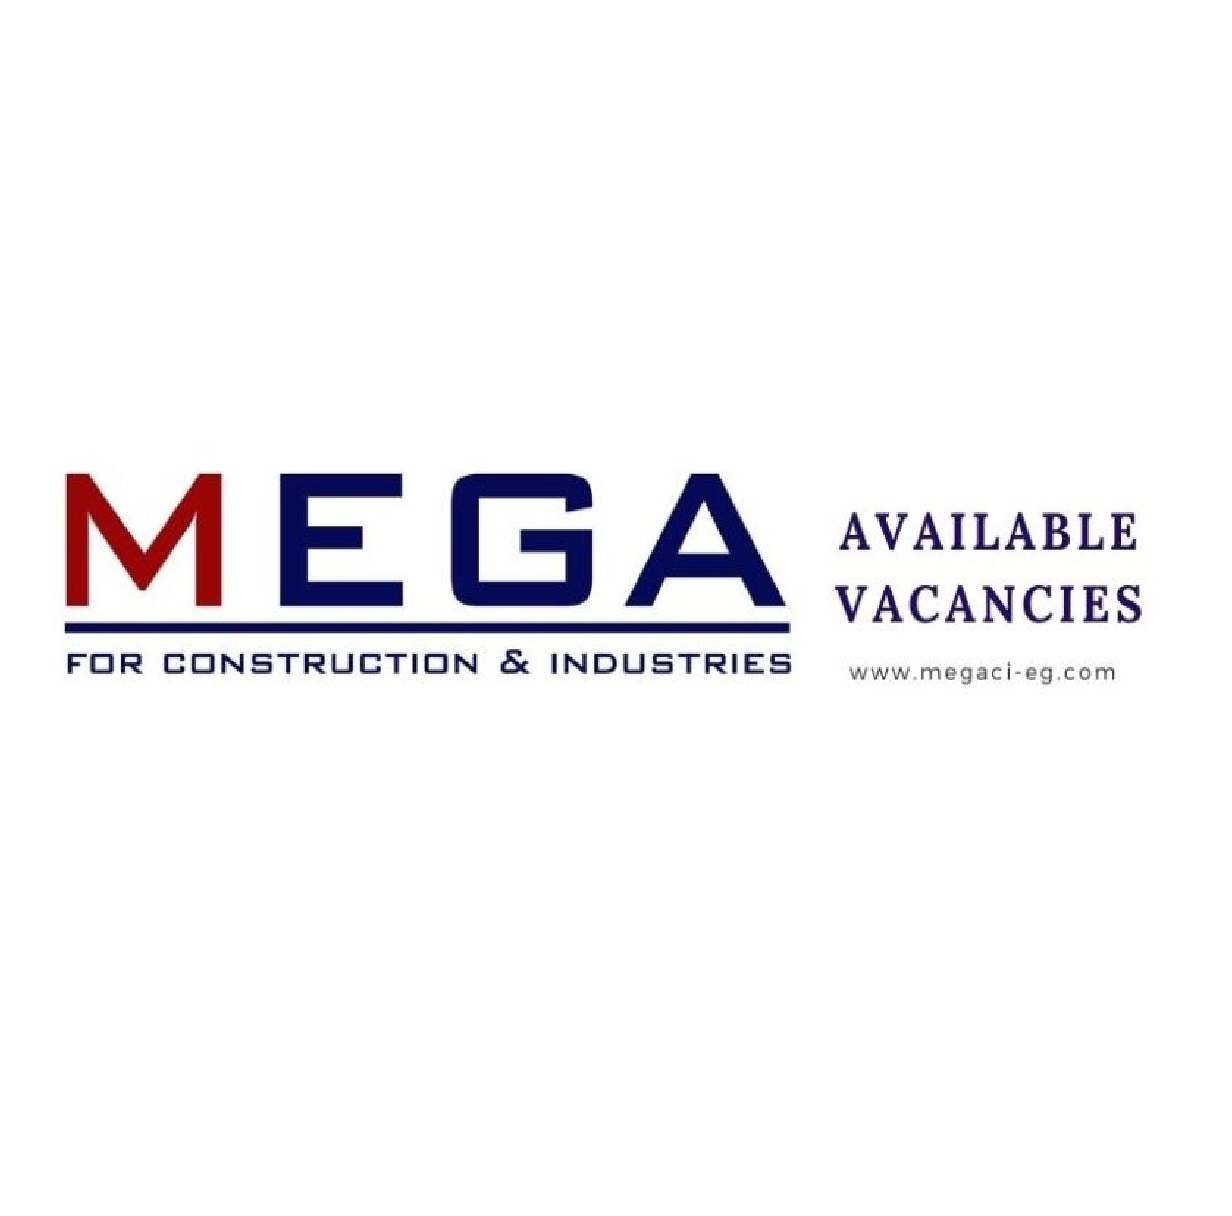 MEGA FOR Construction & Industries